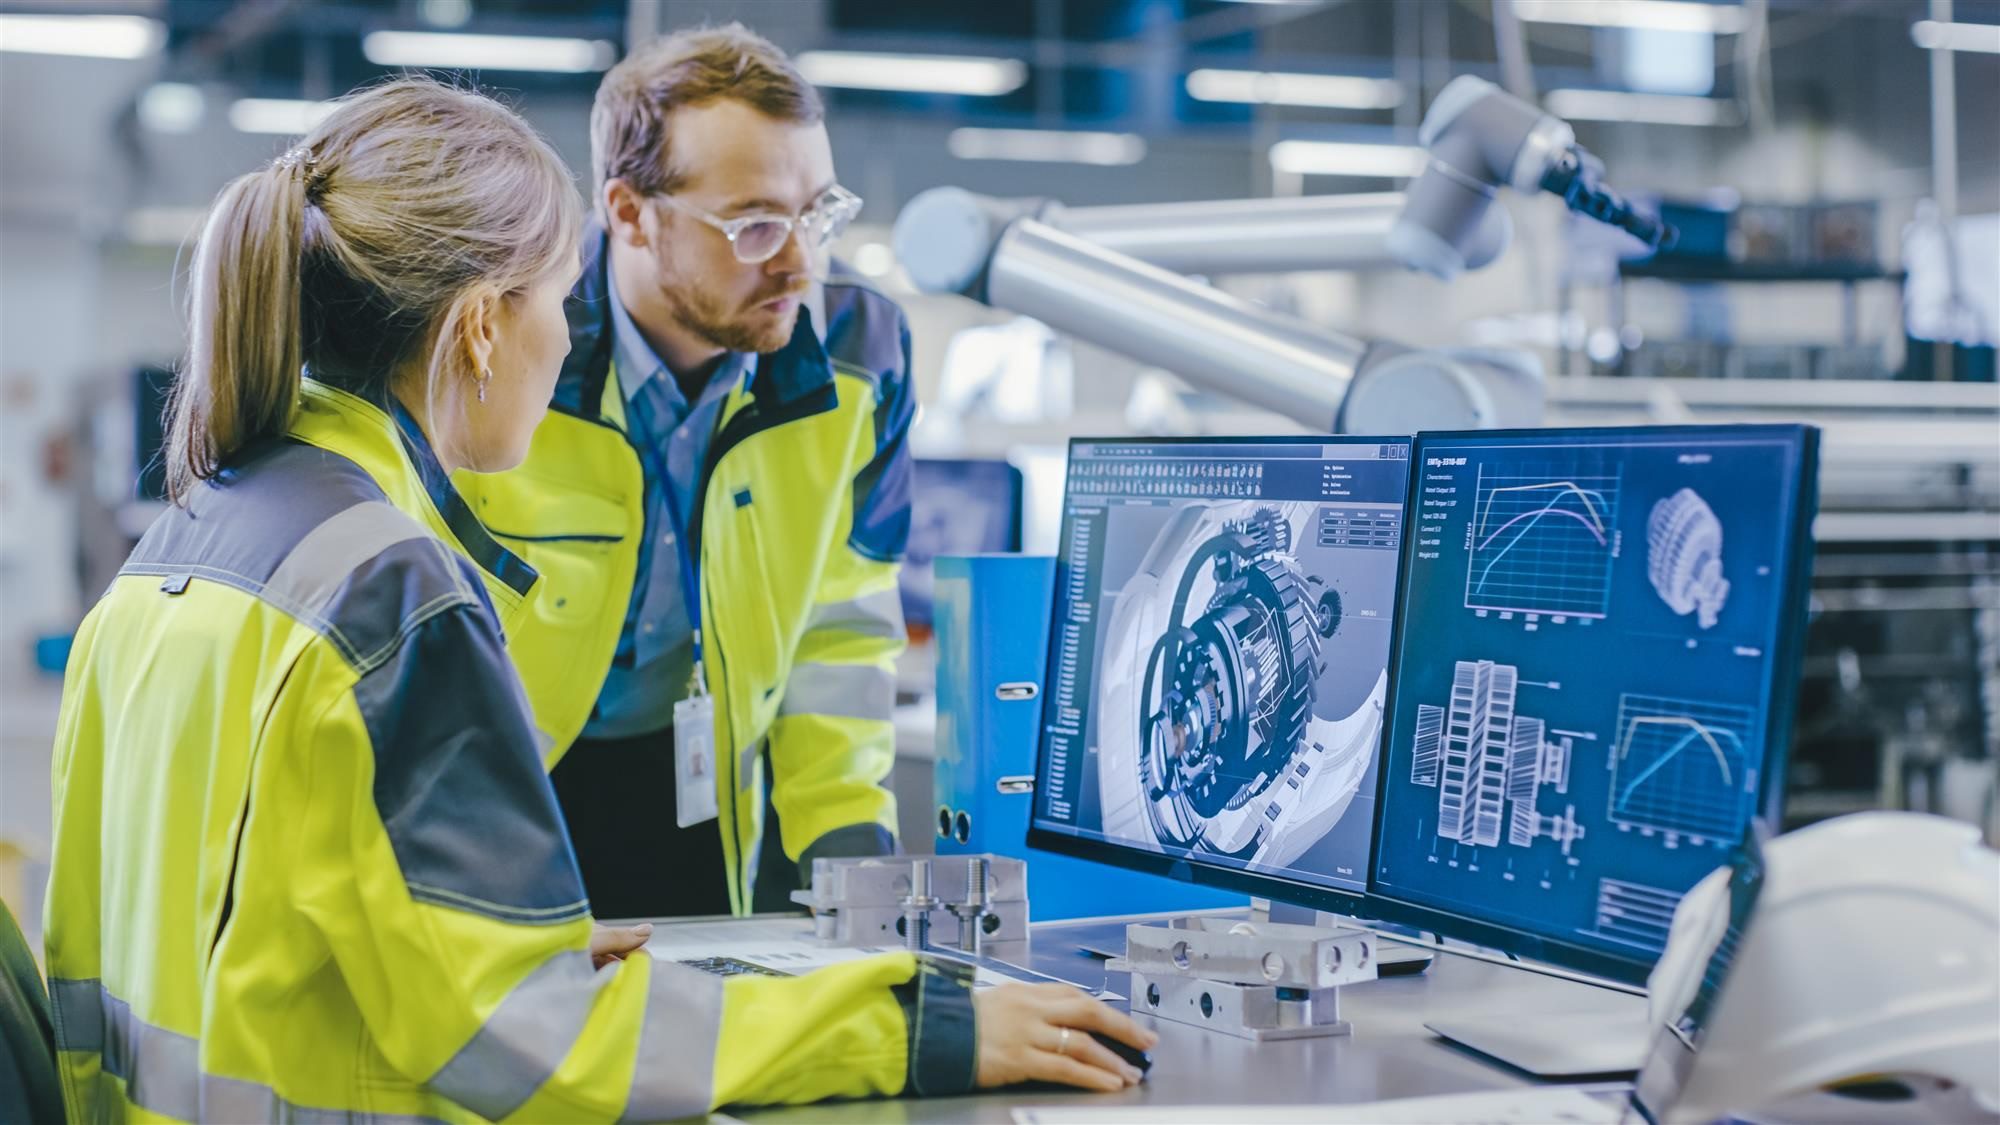 Microsoft Dynamics 365 Business Central is best for midsized manufacturing companies needing an affordable ERP solution to manage their end-to-end manufacturing processes.